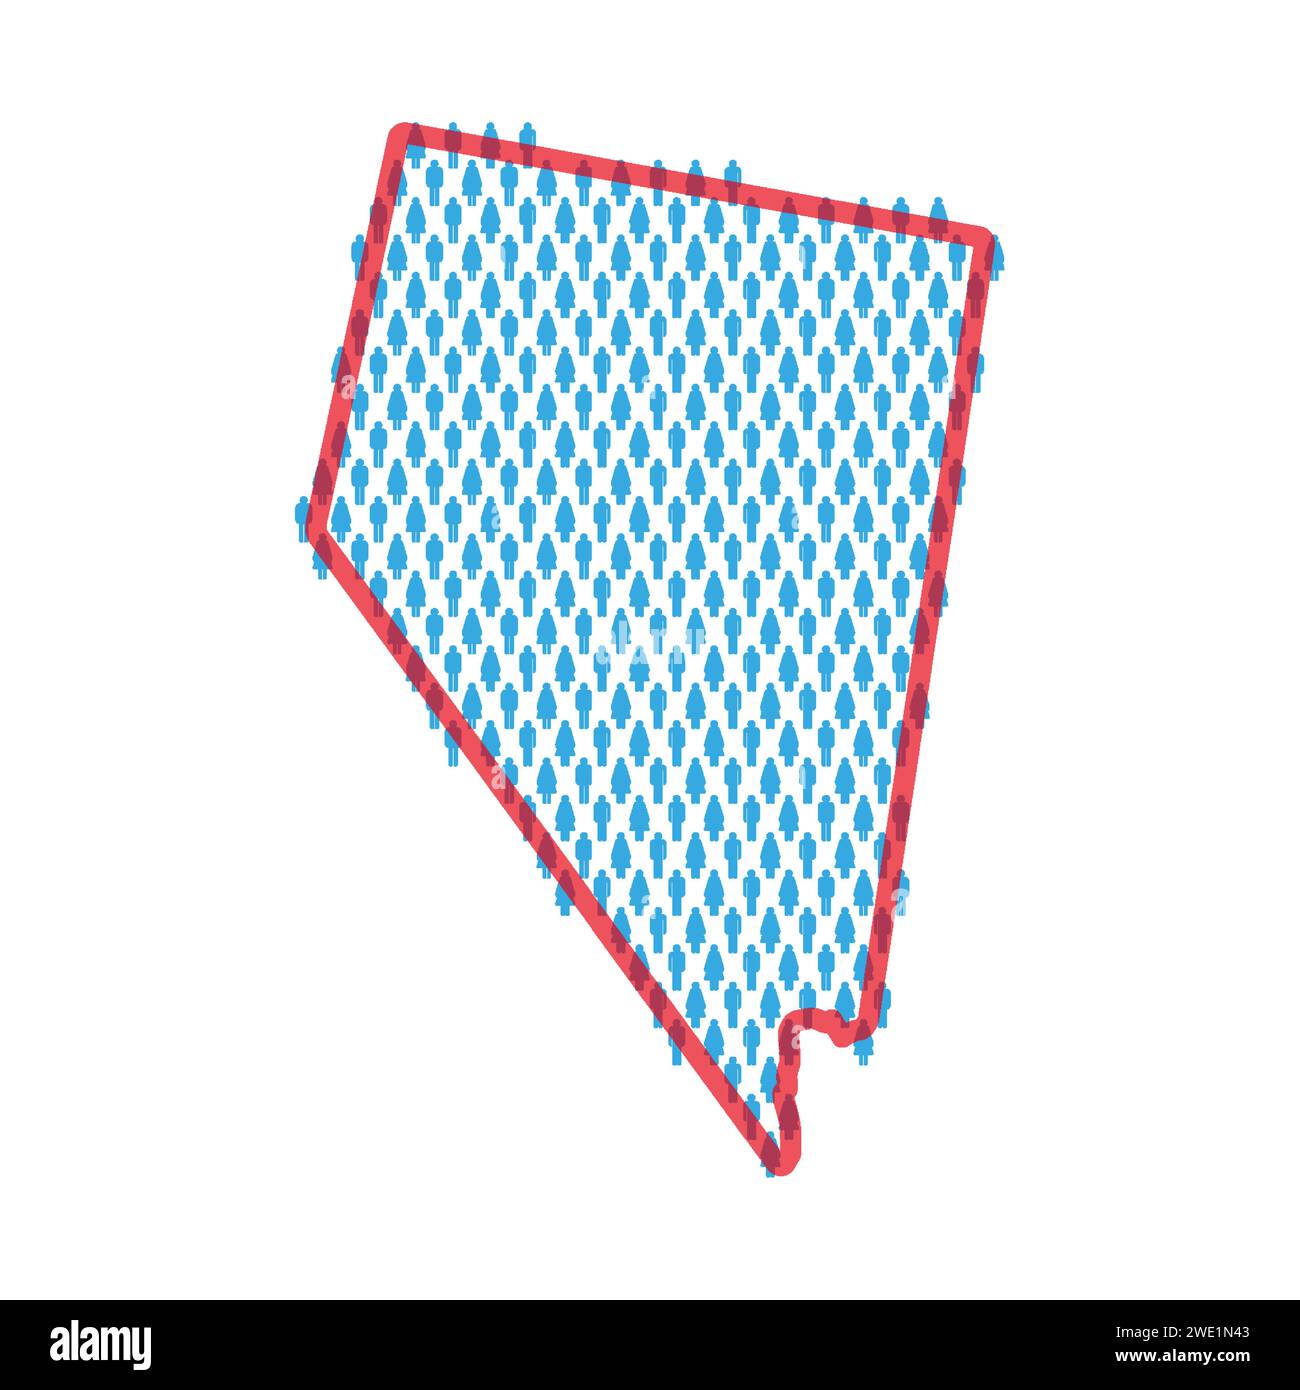 Nevada population map. Stick figures people map with bold red translucent state border. Pattern of men and women icons. Isolated vector illustration. Stock Vector